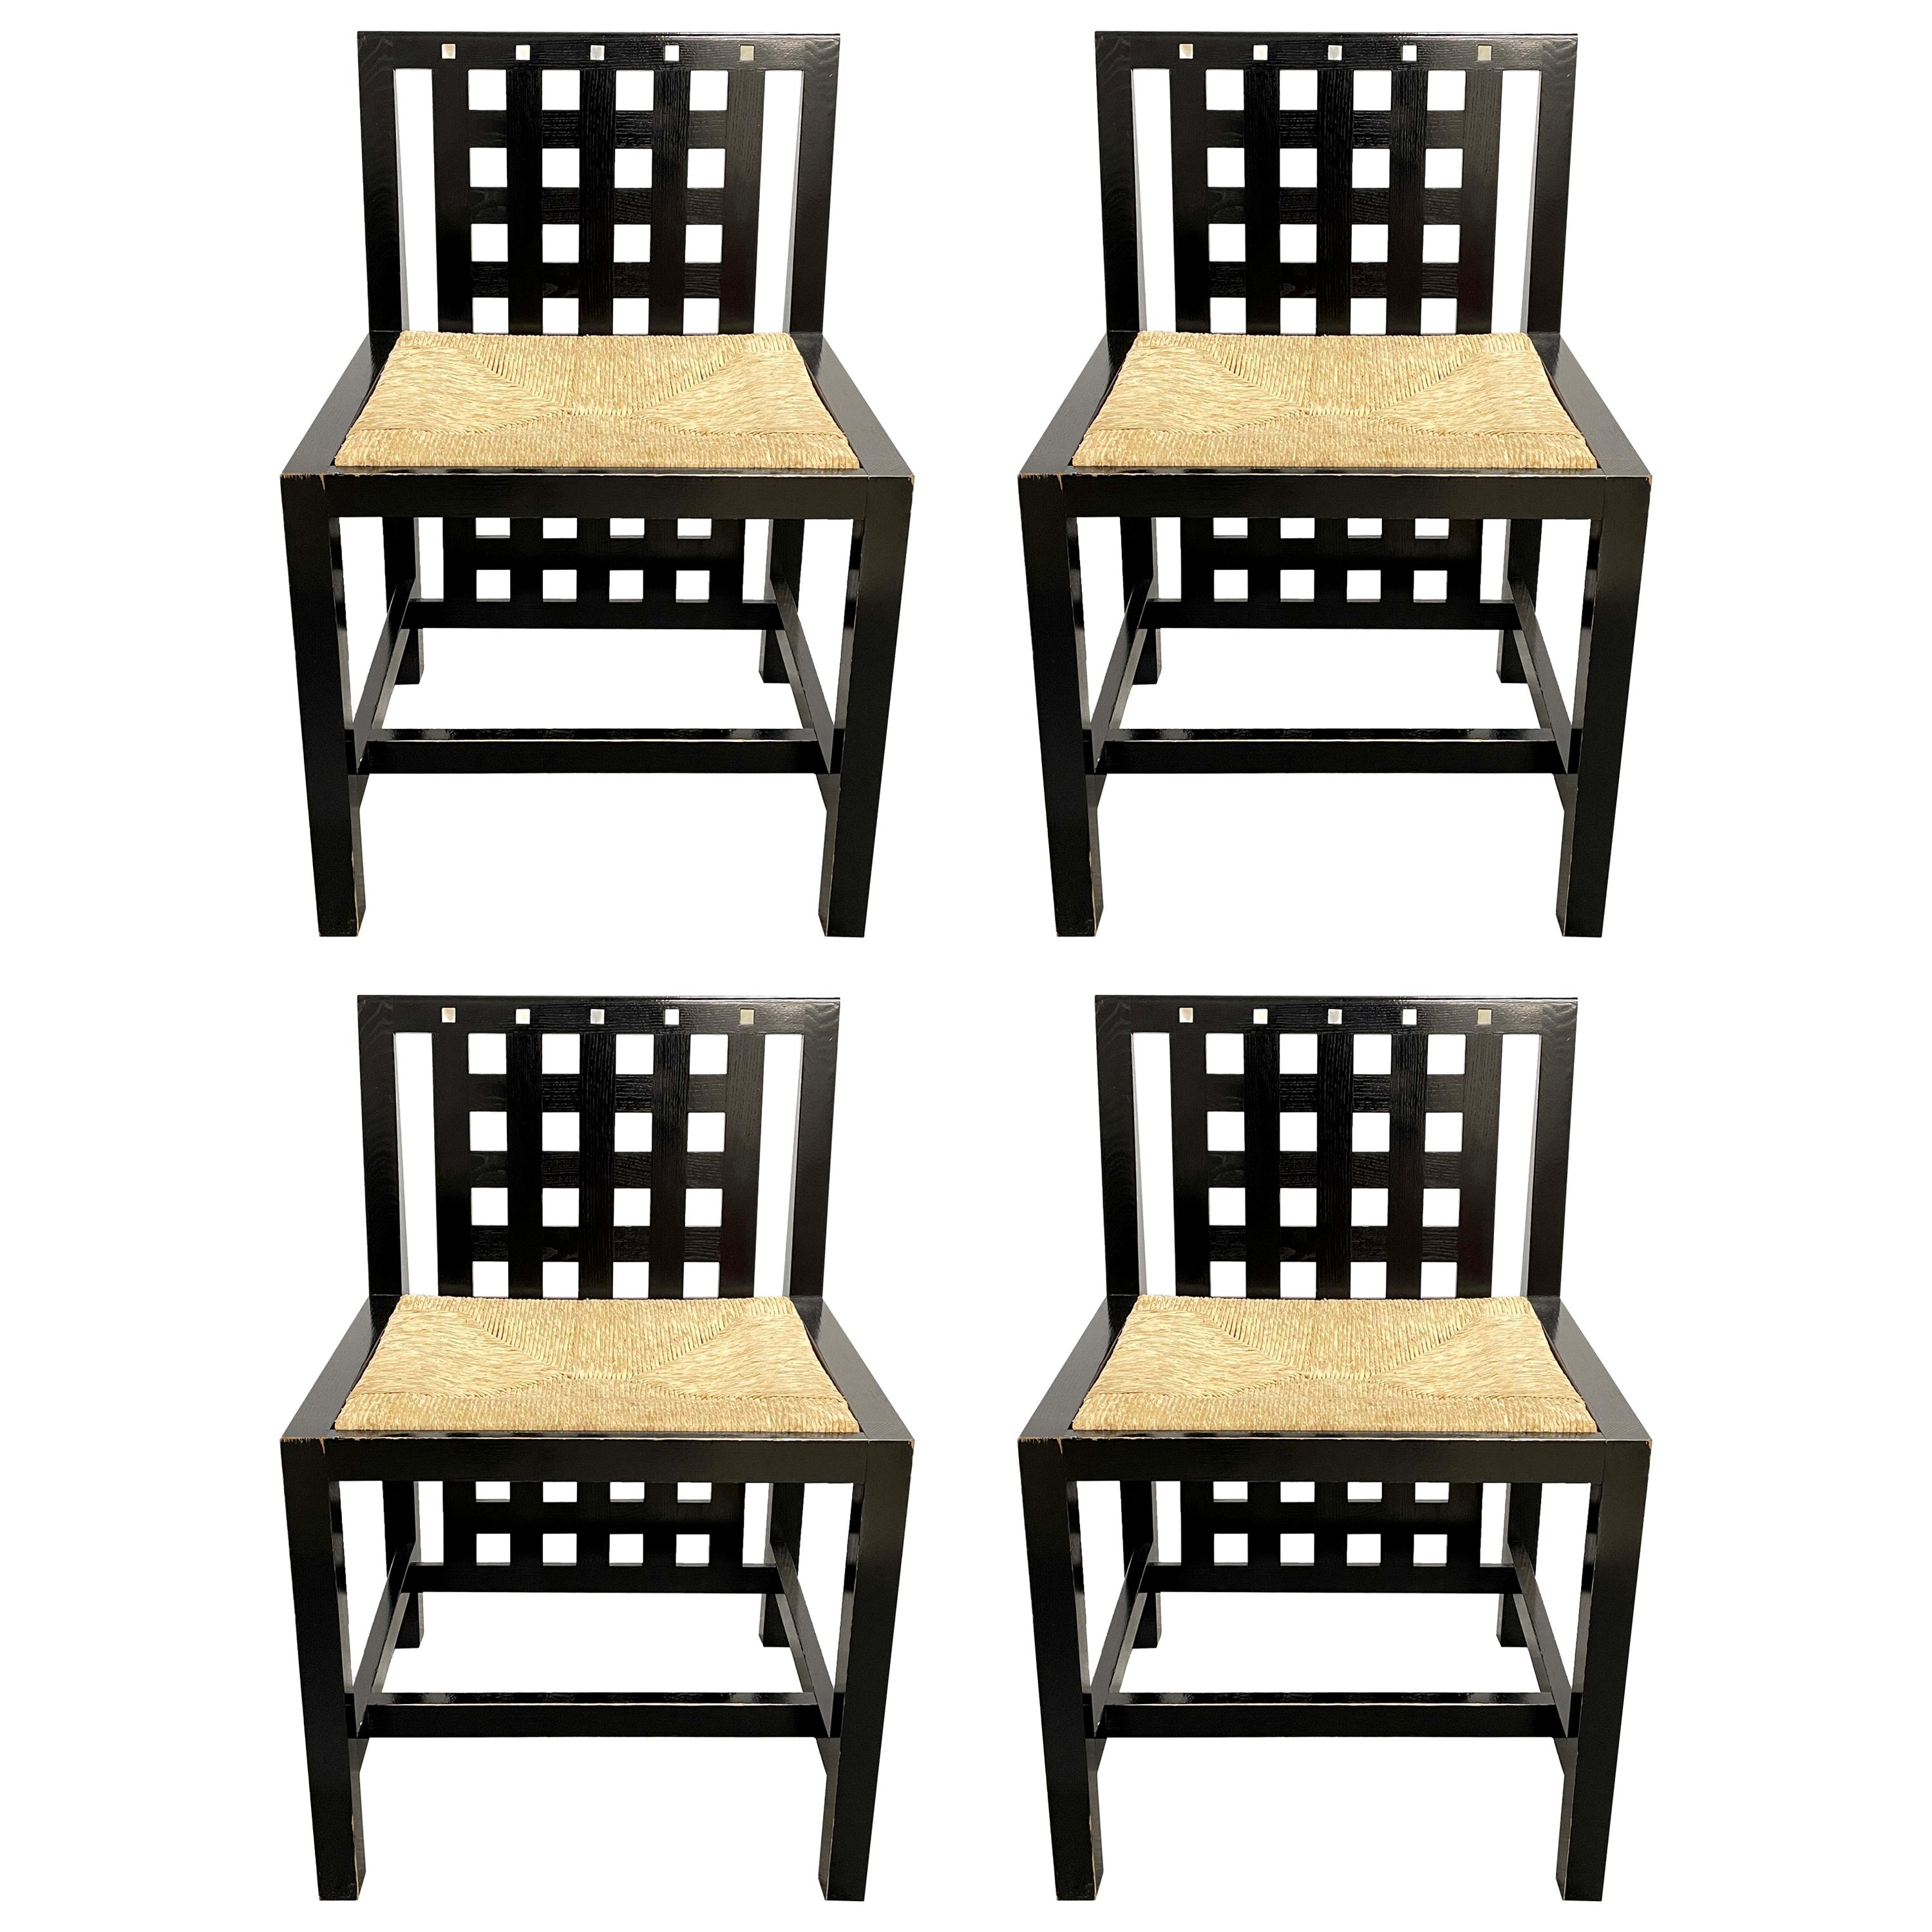 Set of Four Chairs Ds3 Charles Rennie Mackintosh Original Design Made in Italy